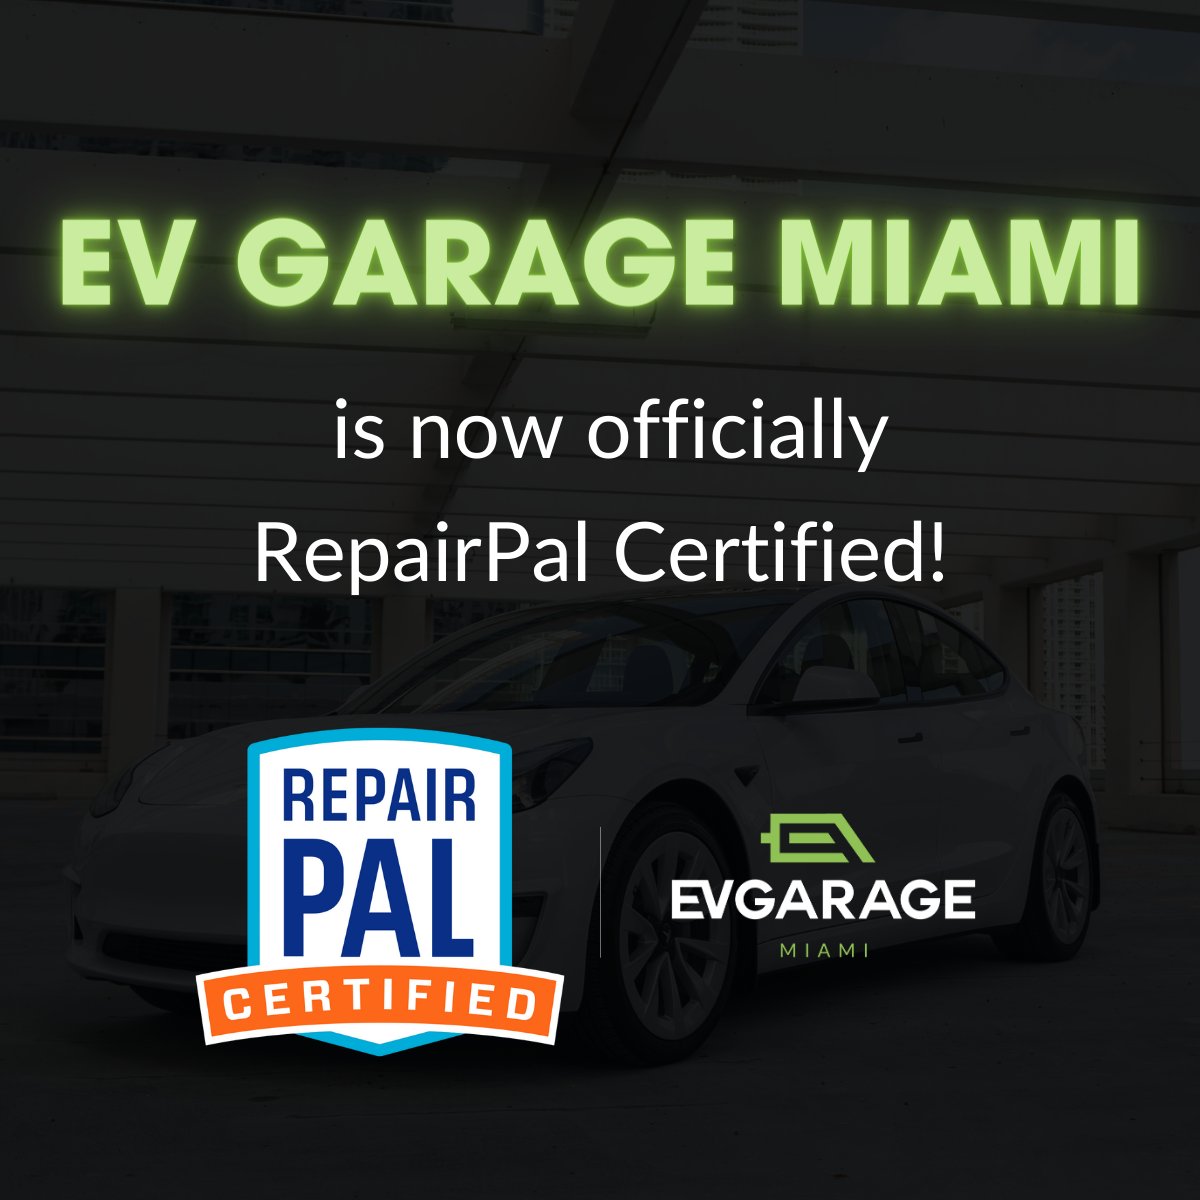 Thrilled to share that EV Garage Miami is now officially RepairPal Certified! 🚗⚡️ 
Committed to delivering top-notch service and expertise in electric vehicle repairs.
Your trusted destination for quality and excellence! #RepairPalCertified #EVMaintenance #MiamiAutoCare